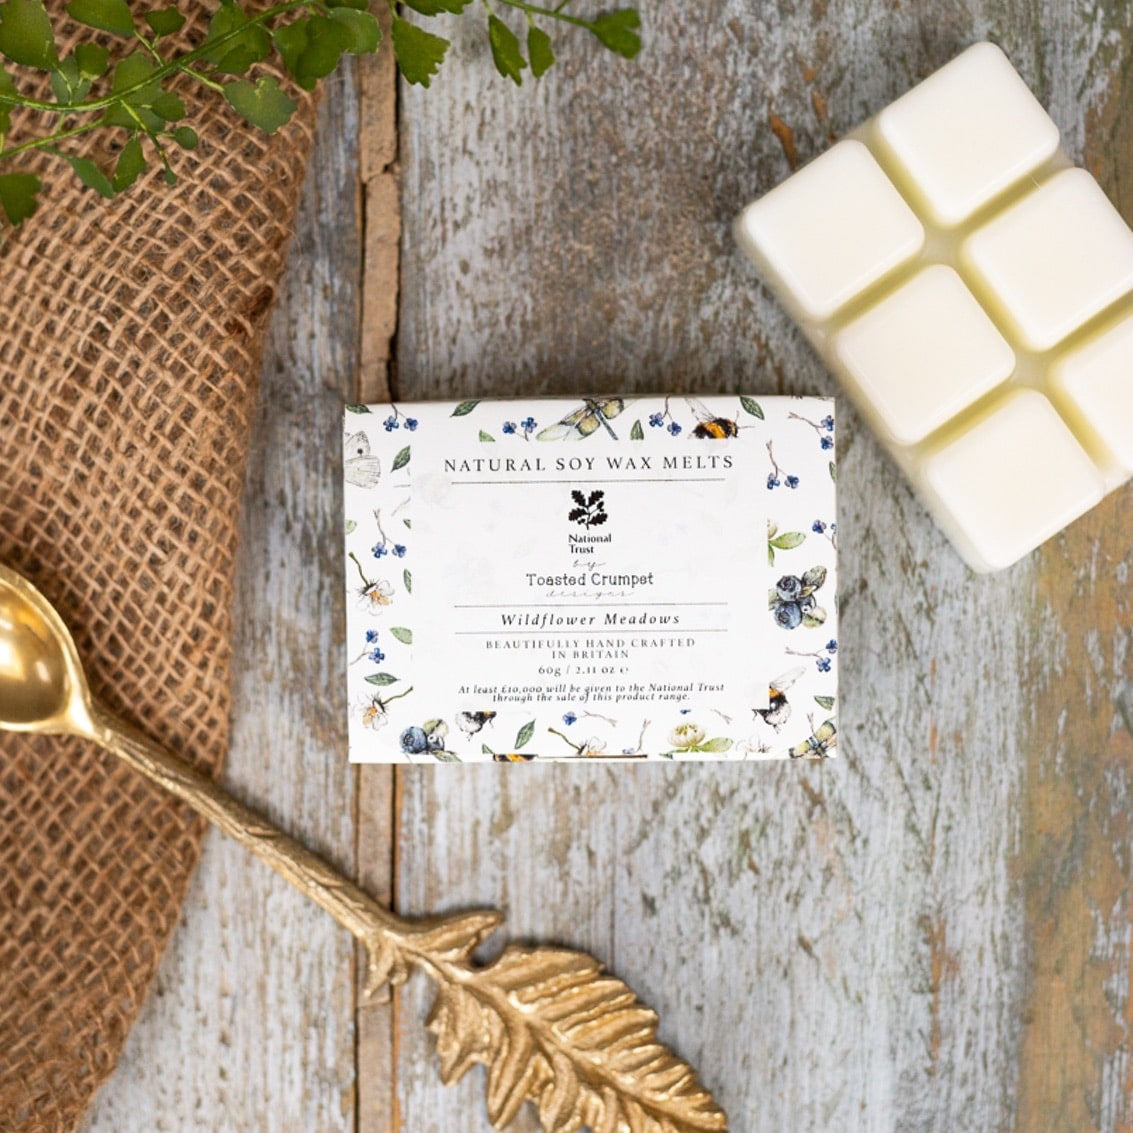 Toasted Crumpet - Wildflower Meadows - Boxed Soy Wax Melts - The Bumblebee Collection